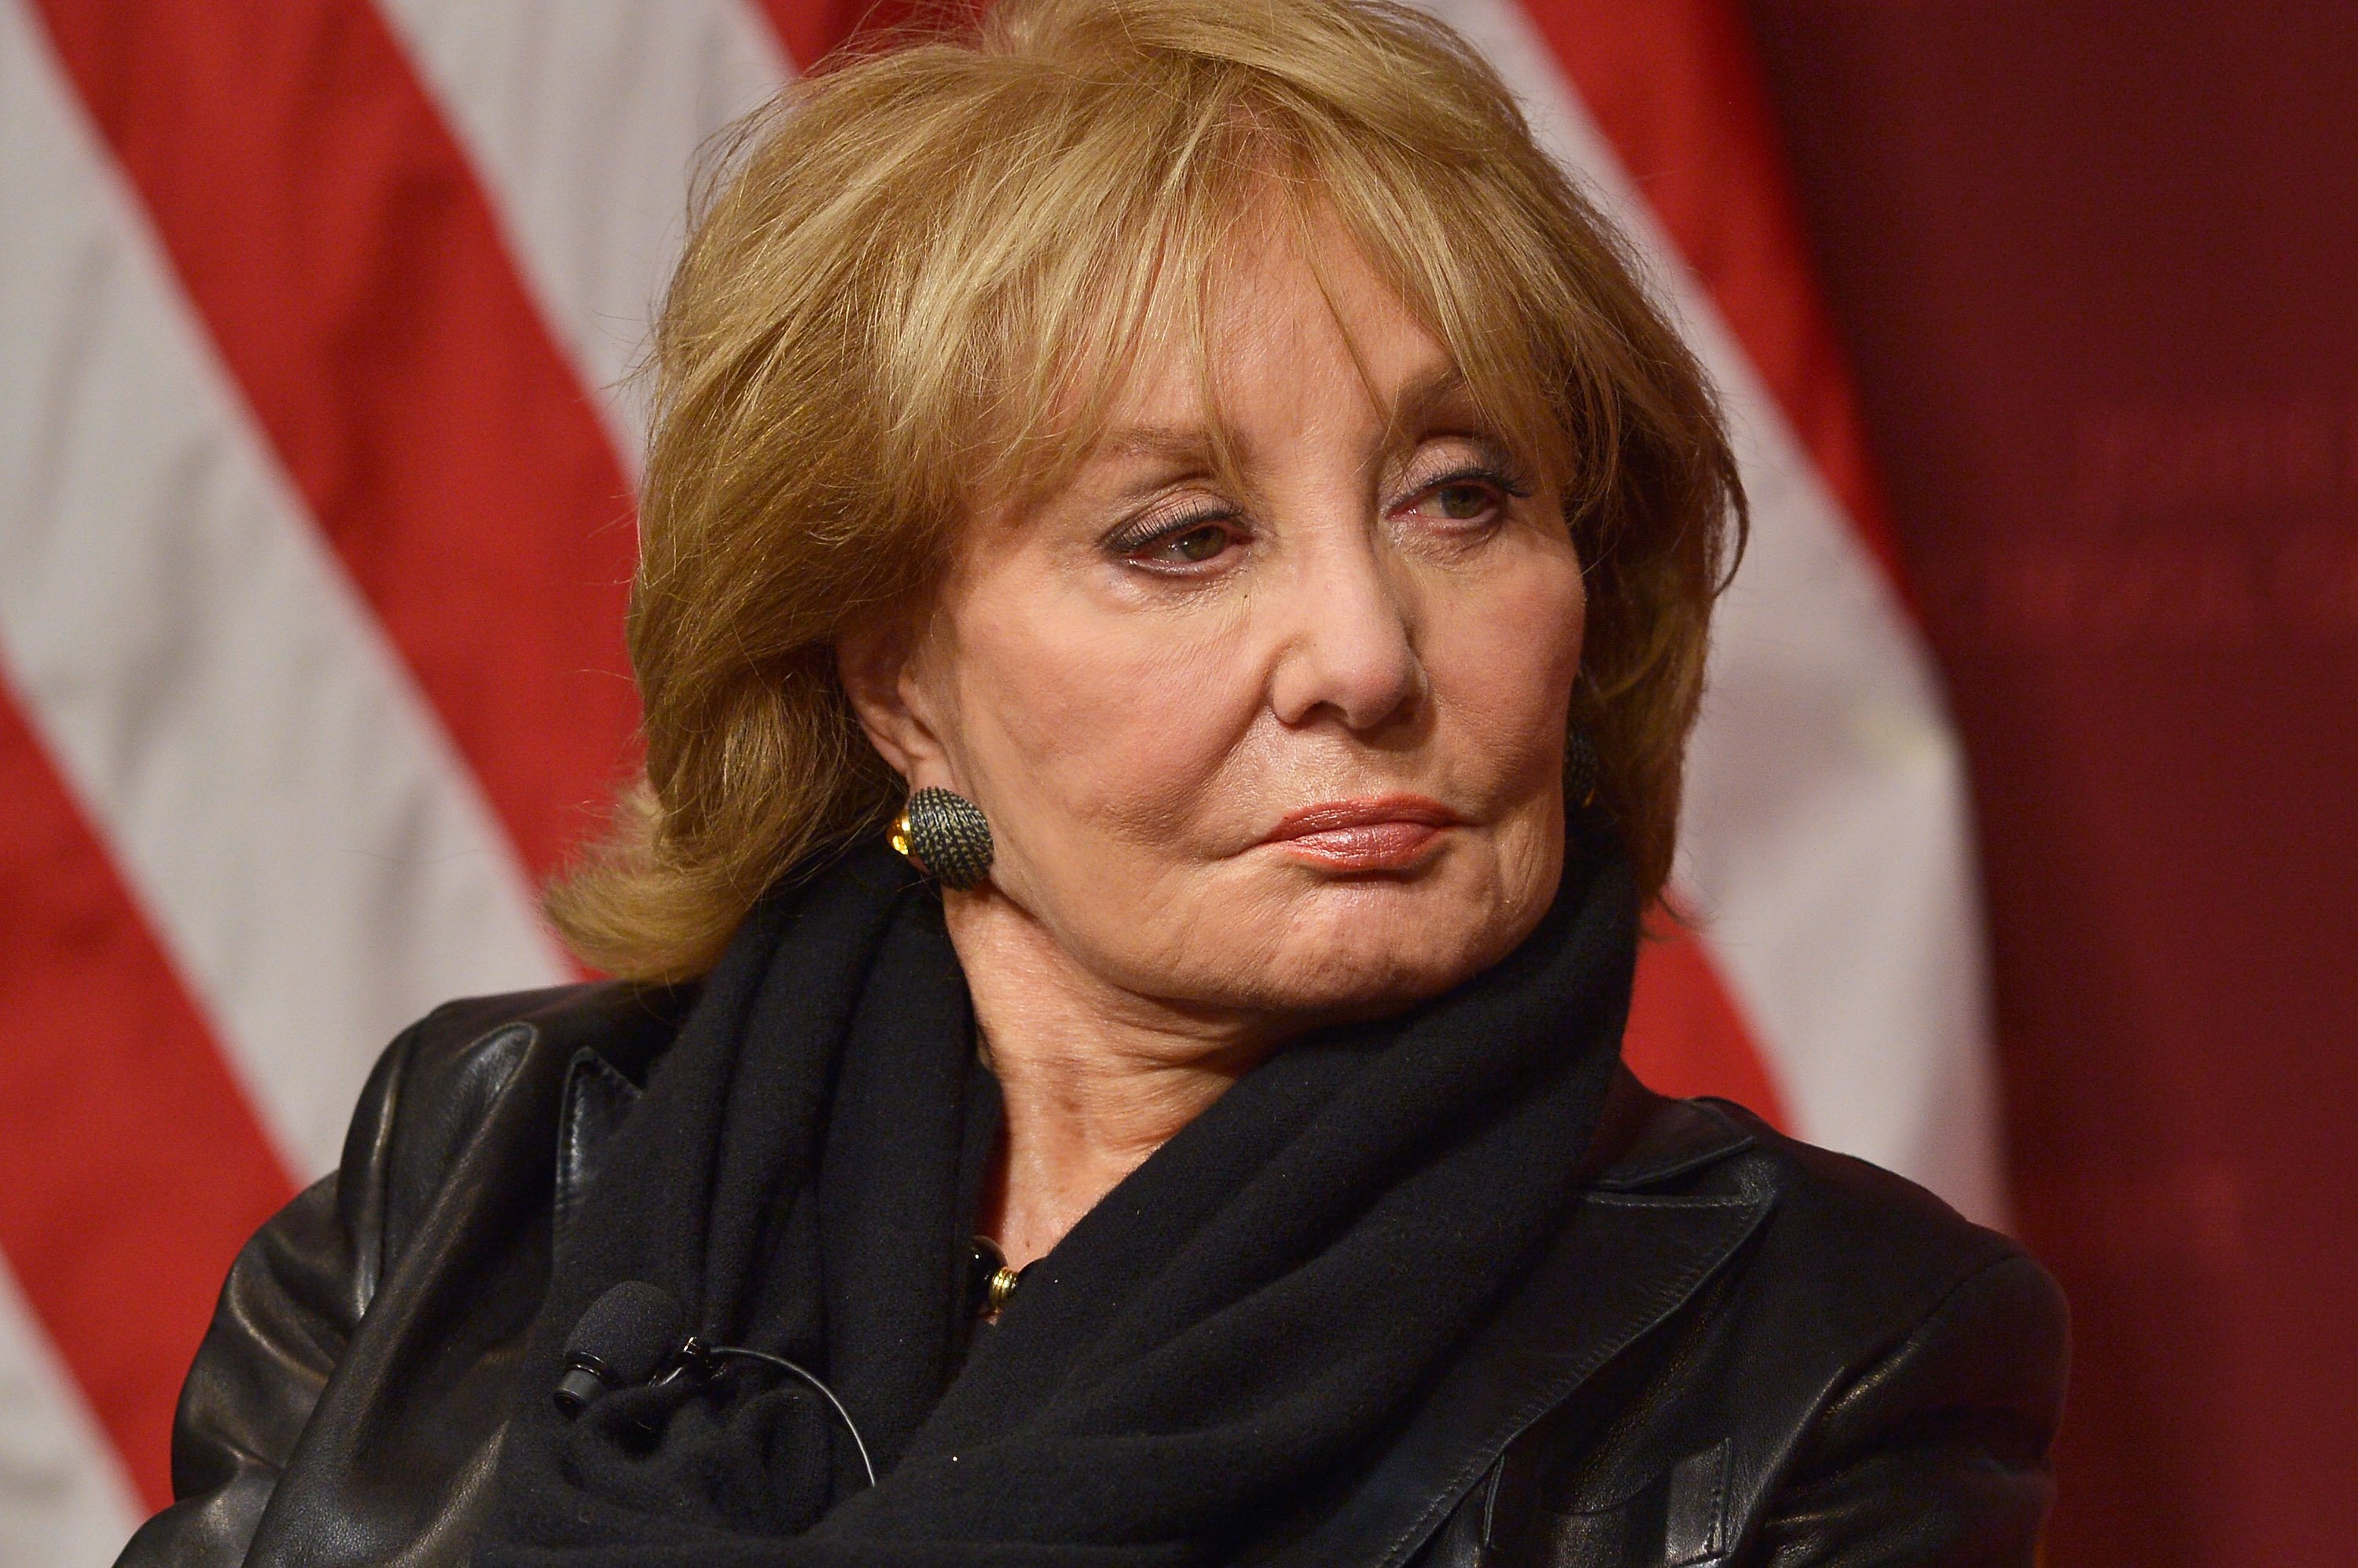 Barbara Walters at the "The John F. Kennedy Jr. Forum presents An Evening with Barbara Walters" at Harvard University on October 7, 2014 in Cambridge, Massachusetts. | Source: Getty Images